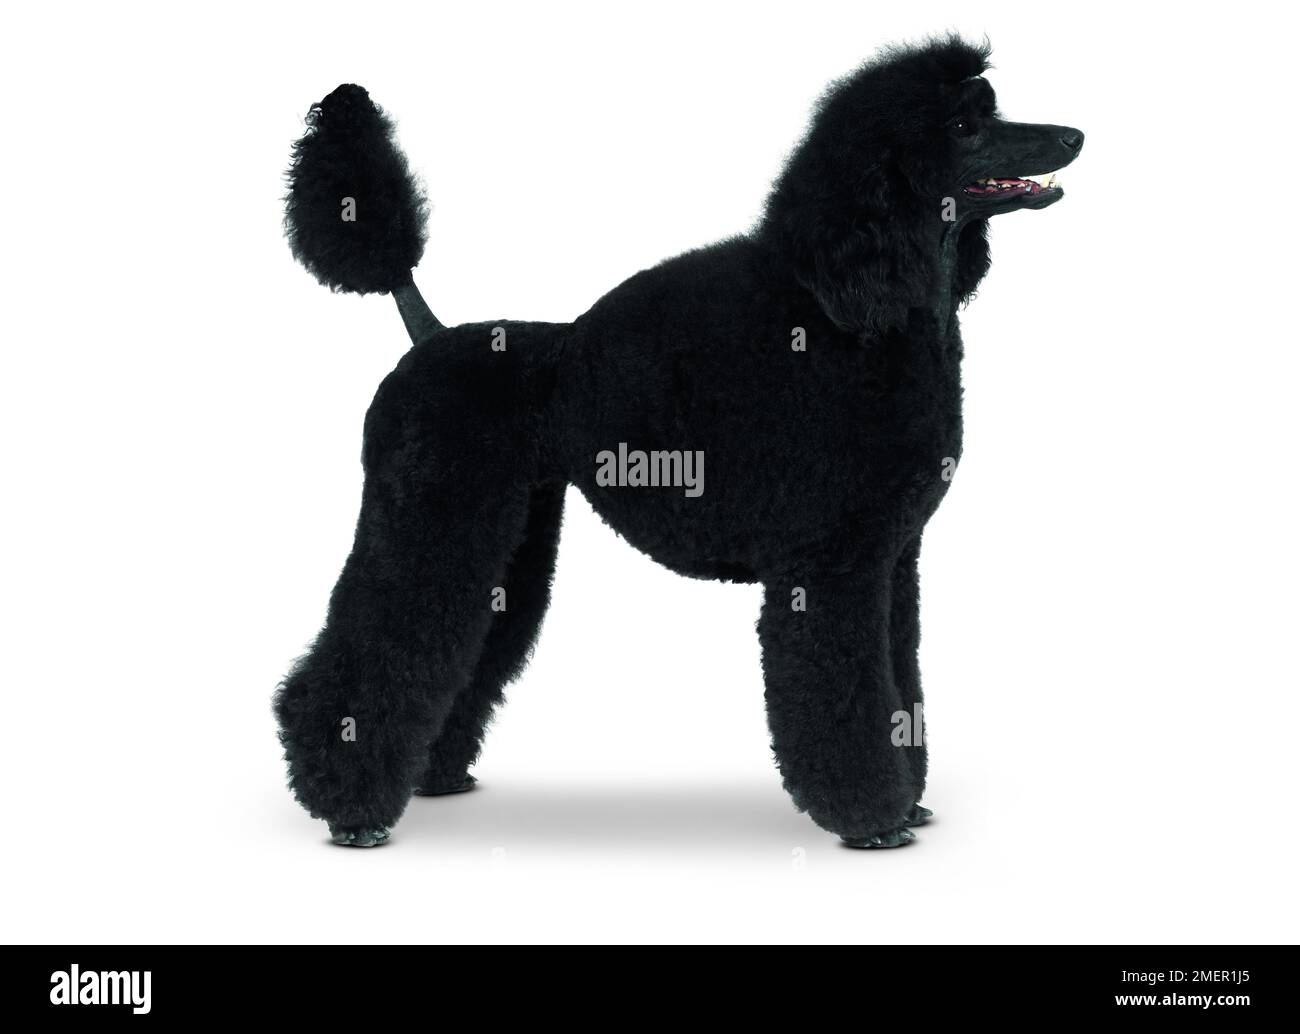 Black Miniature Poodle, standing, side view Stock Photo